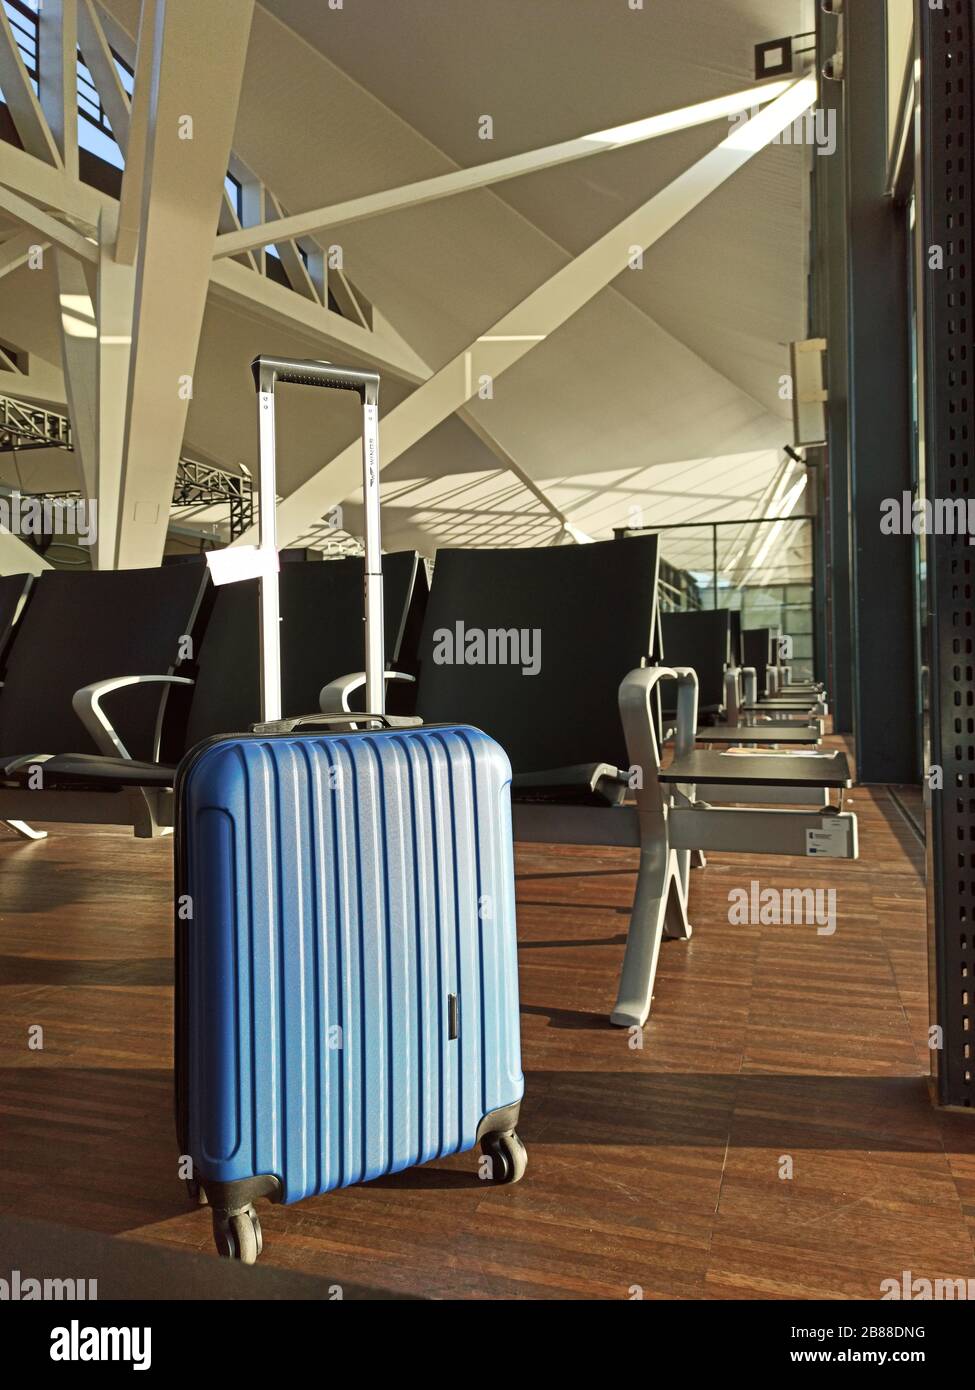 Blue suitcase in an empty airport. Waiting area Flight delay cancellation. Travel and vacation concept. Coronavirus COVID19 quarantine Stock Photo